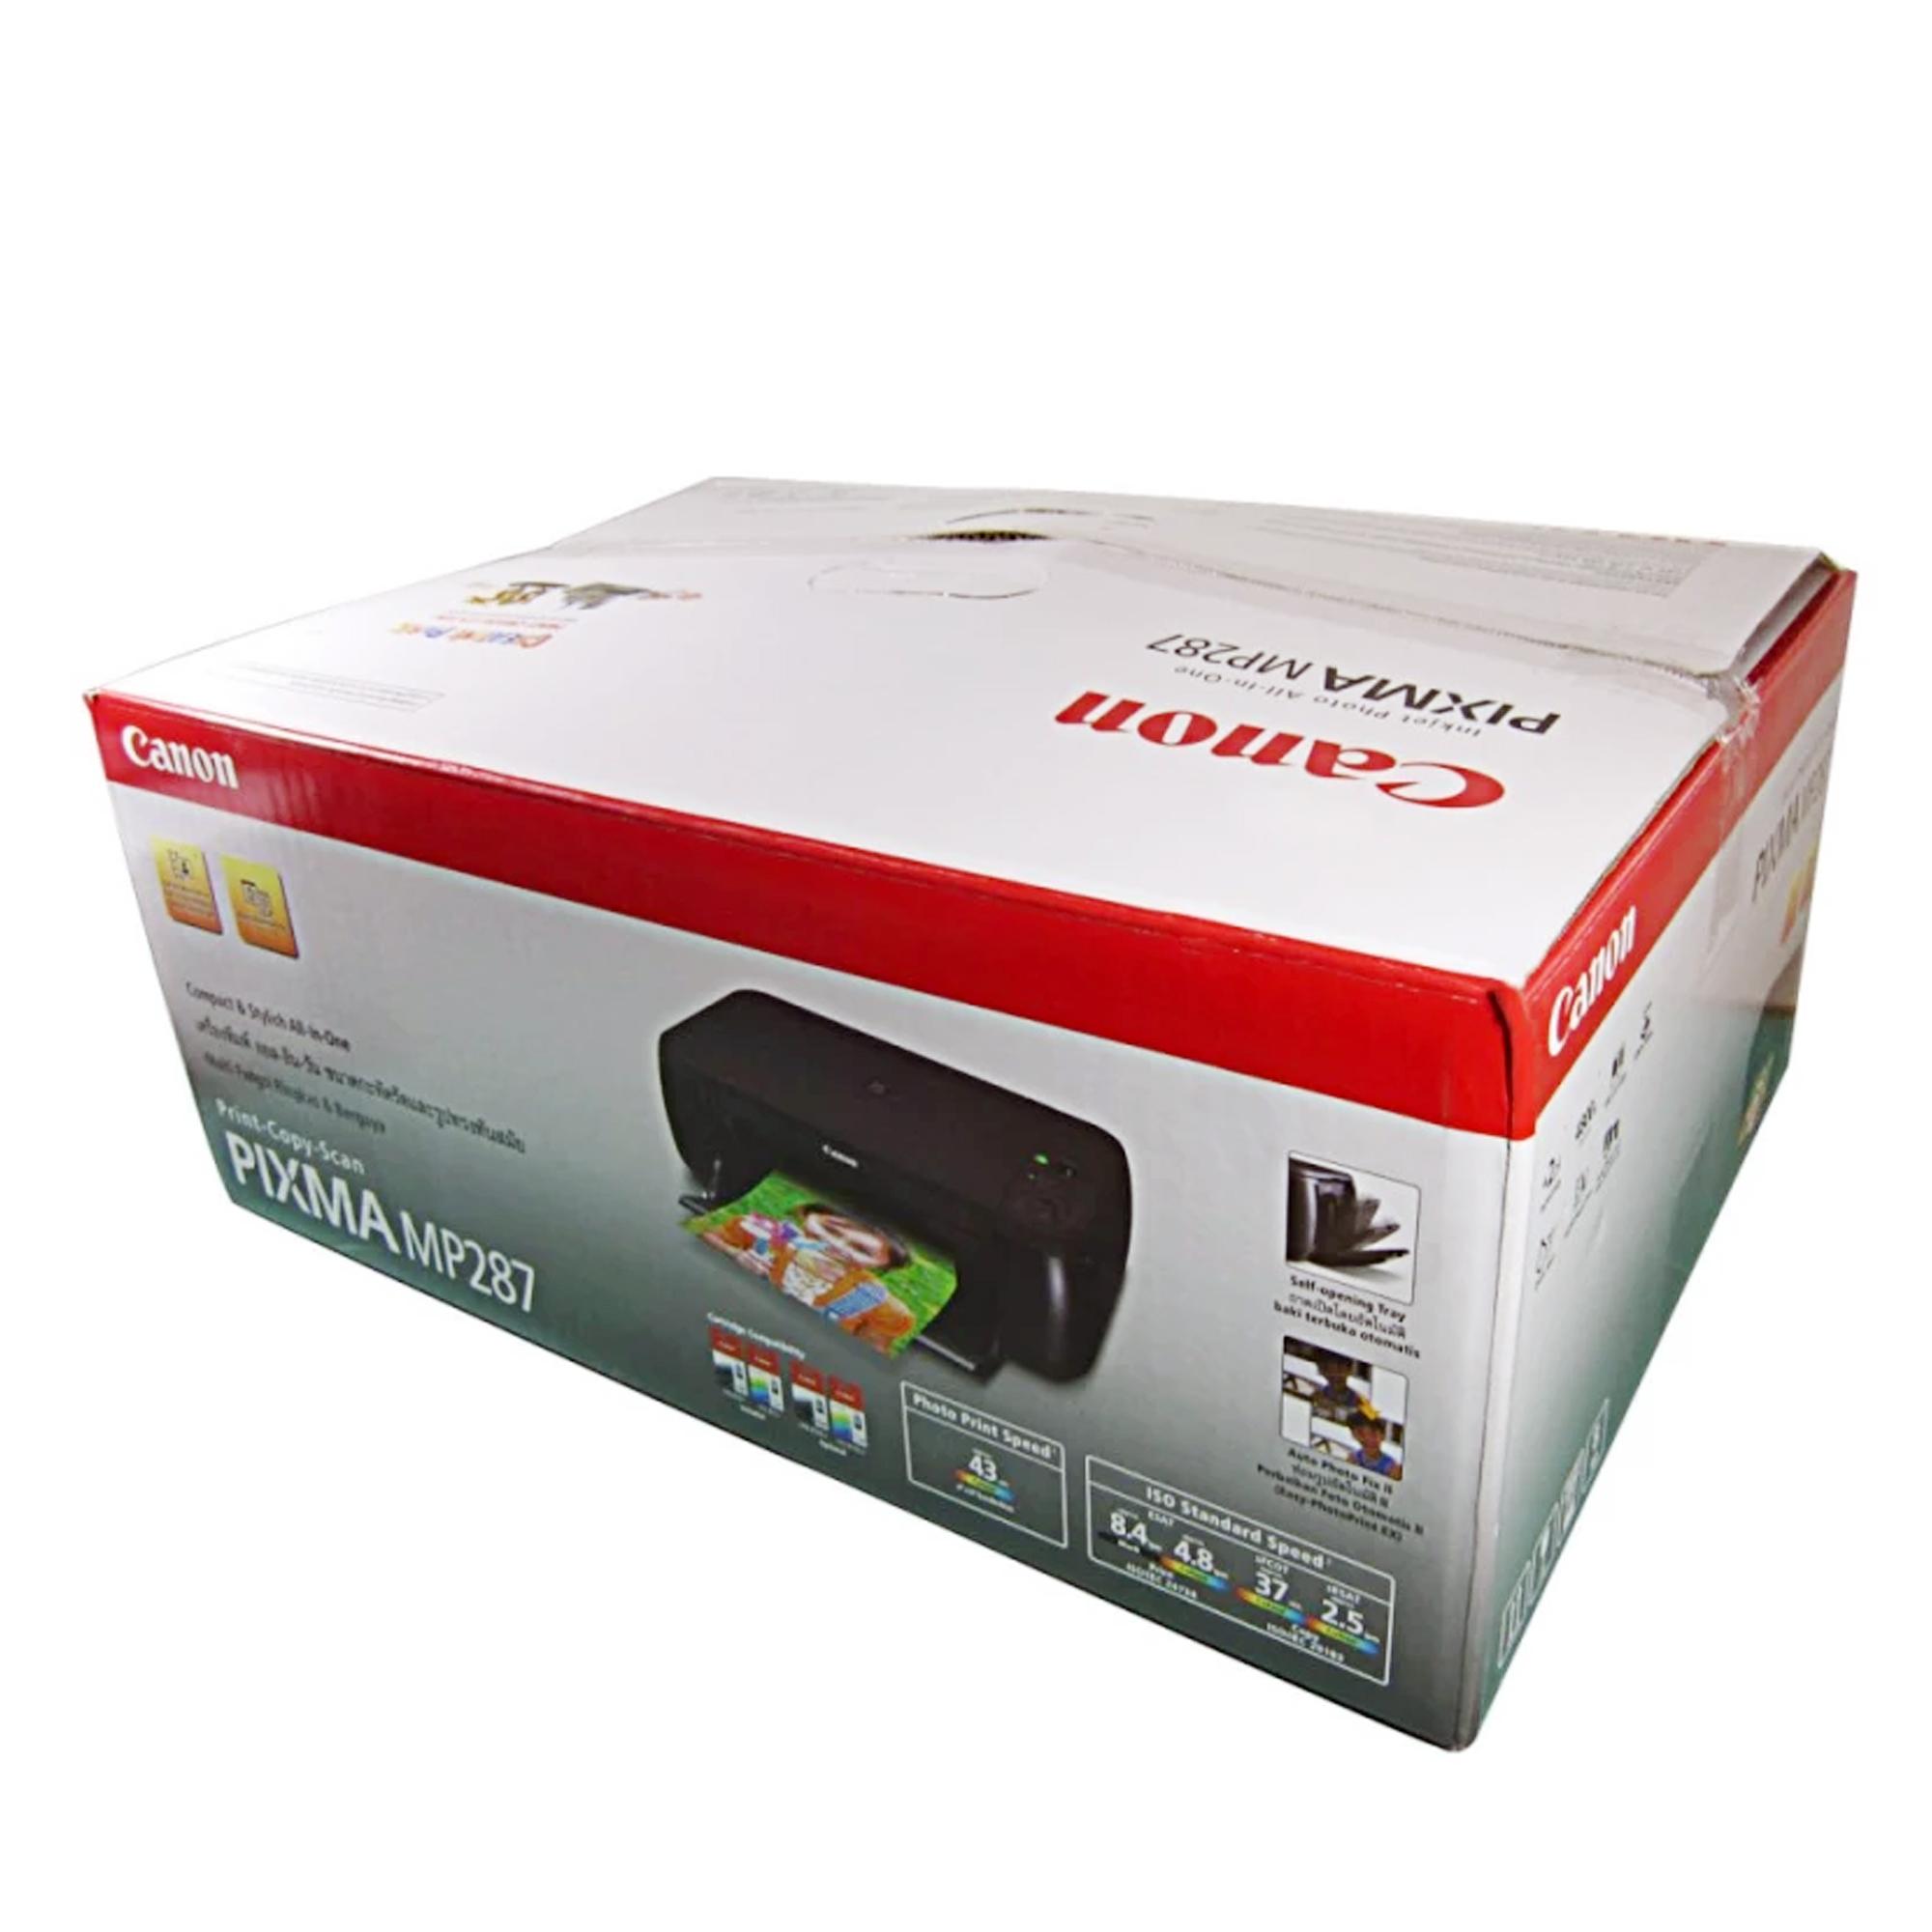 Canon Pixma Mp287 Printercopierscanner With Cis Filled With 4 Color Inks Review And Price 6996